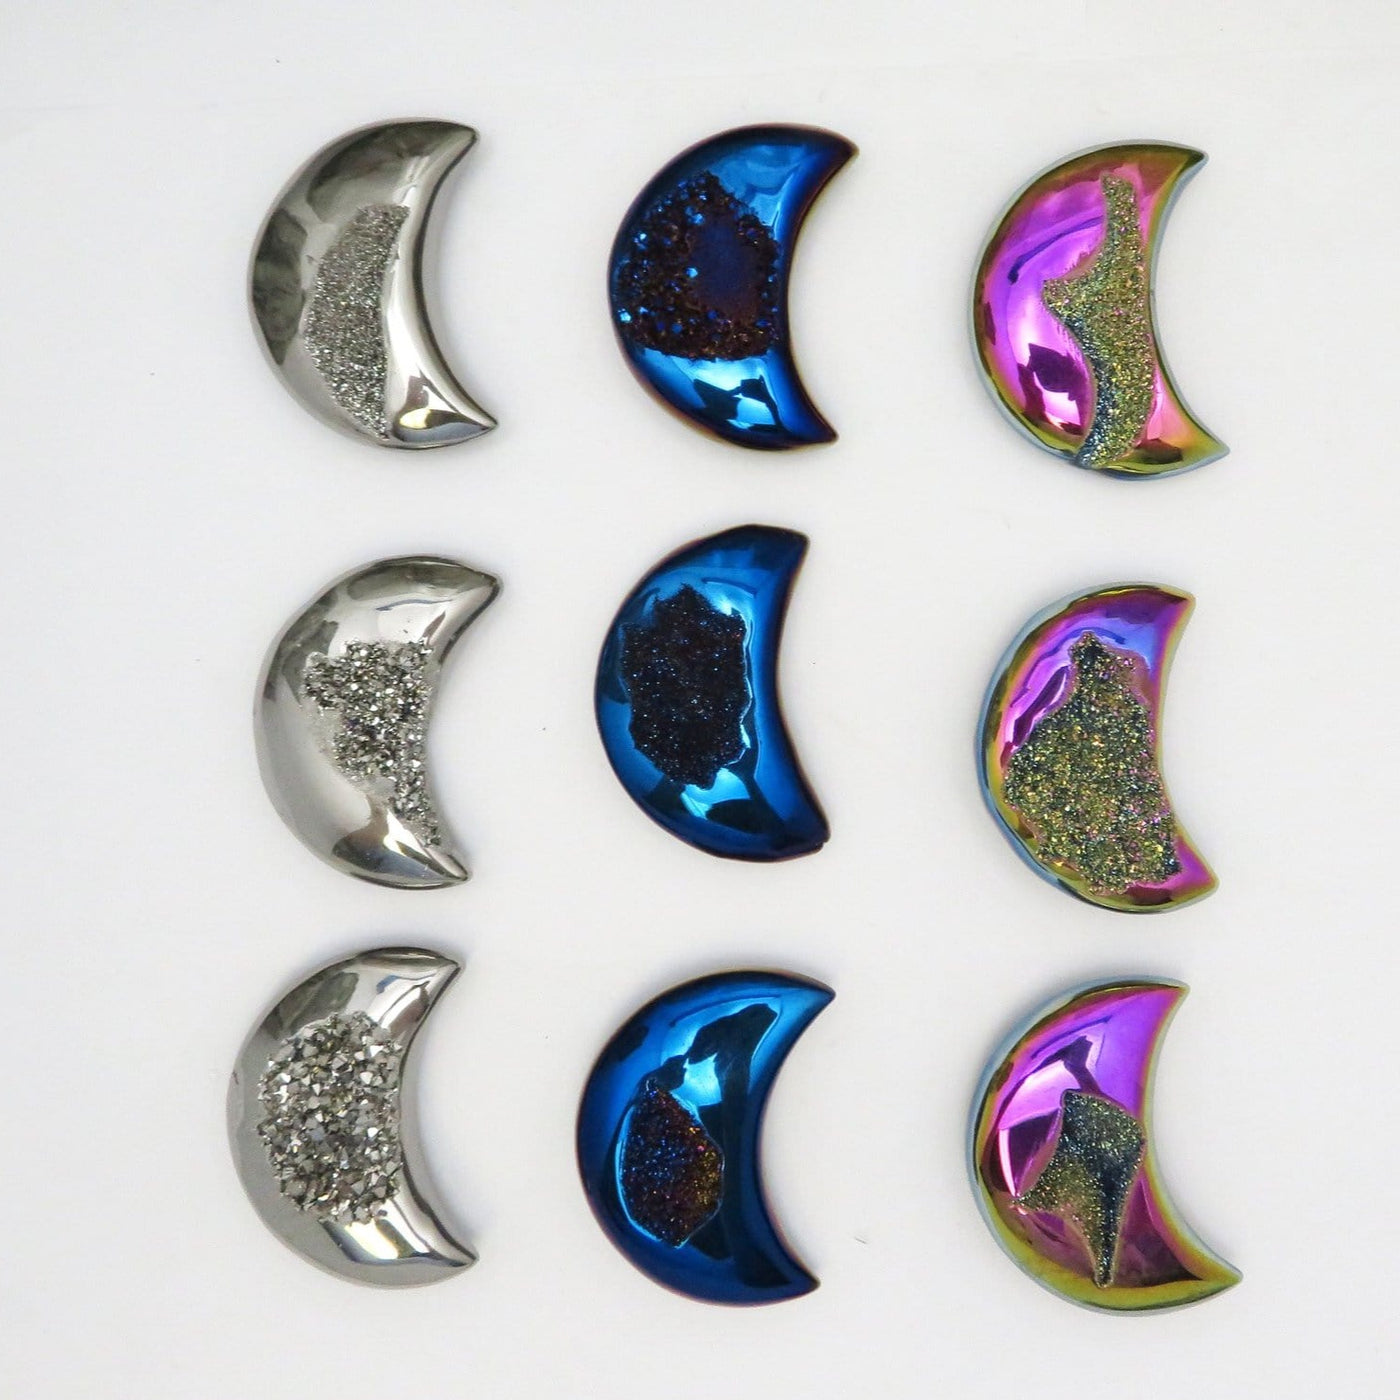 Titanium Druzy Moons in different colors on white background